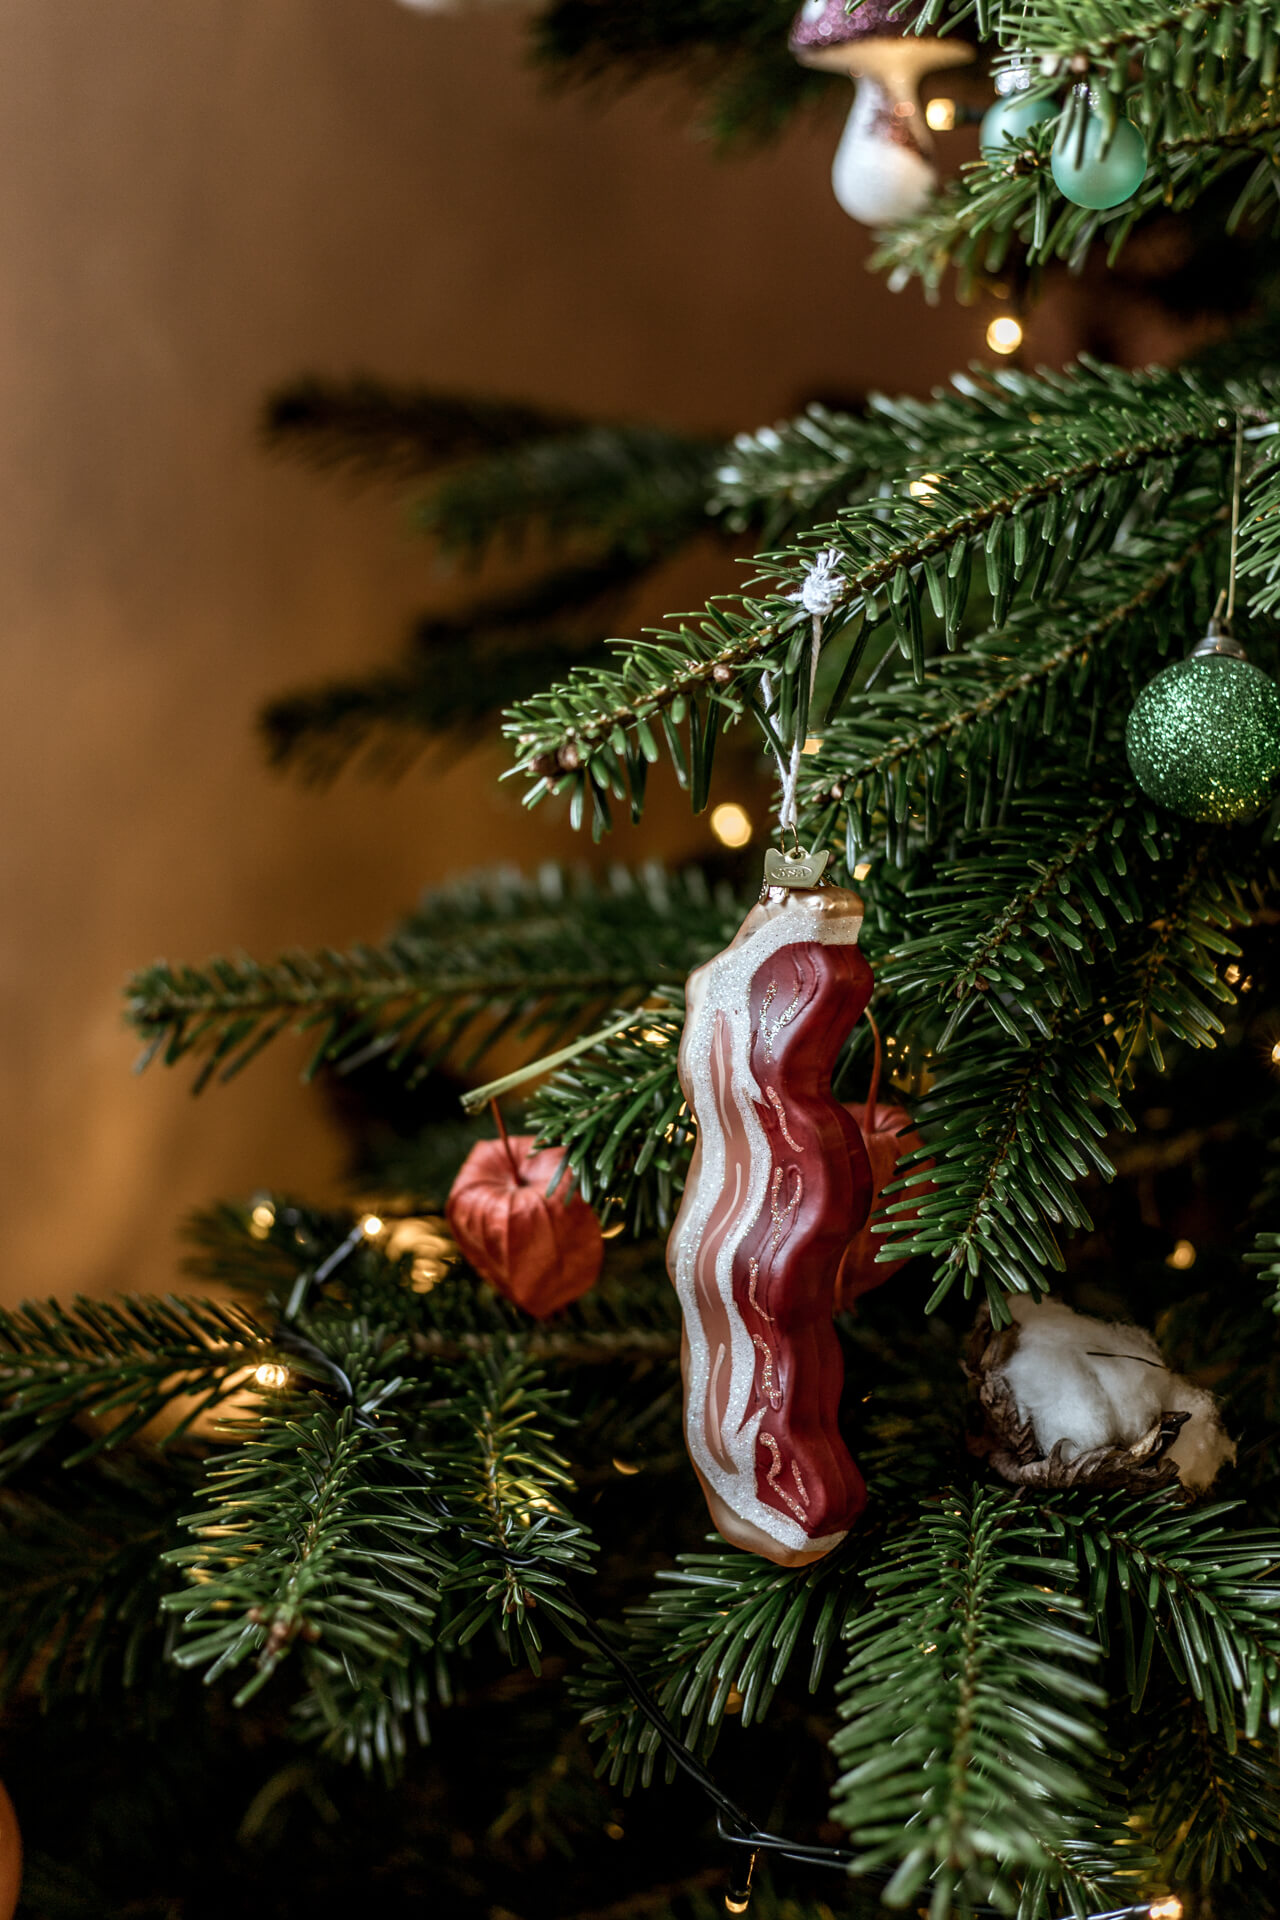 Getting Christmassy is one of the perfect website tweaks for your small business